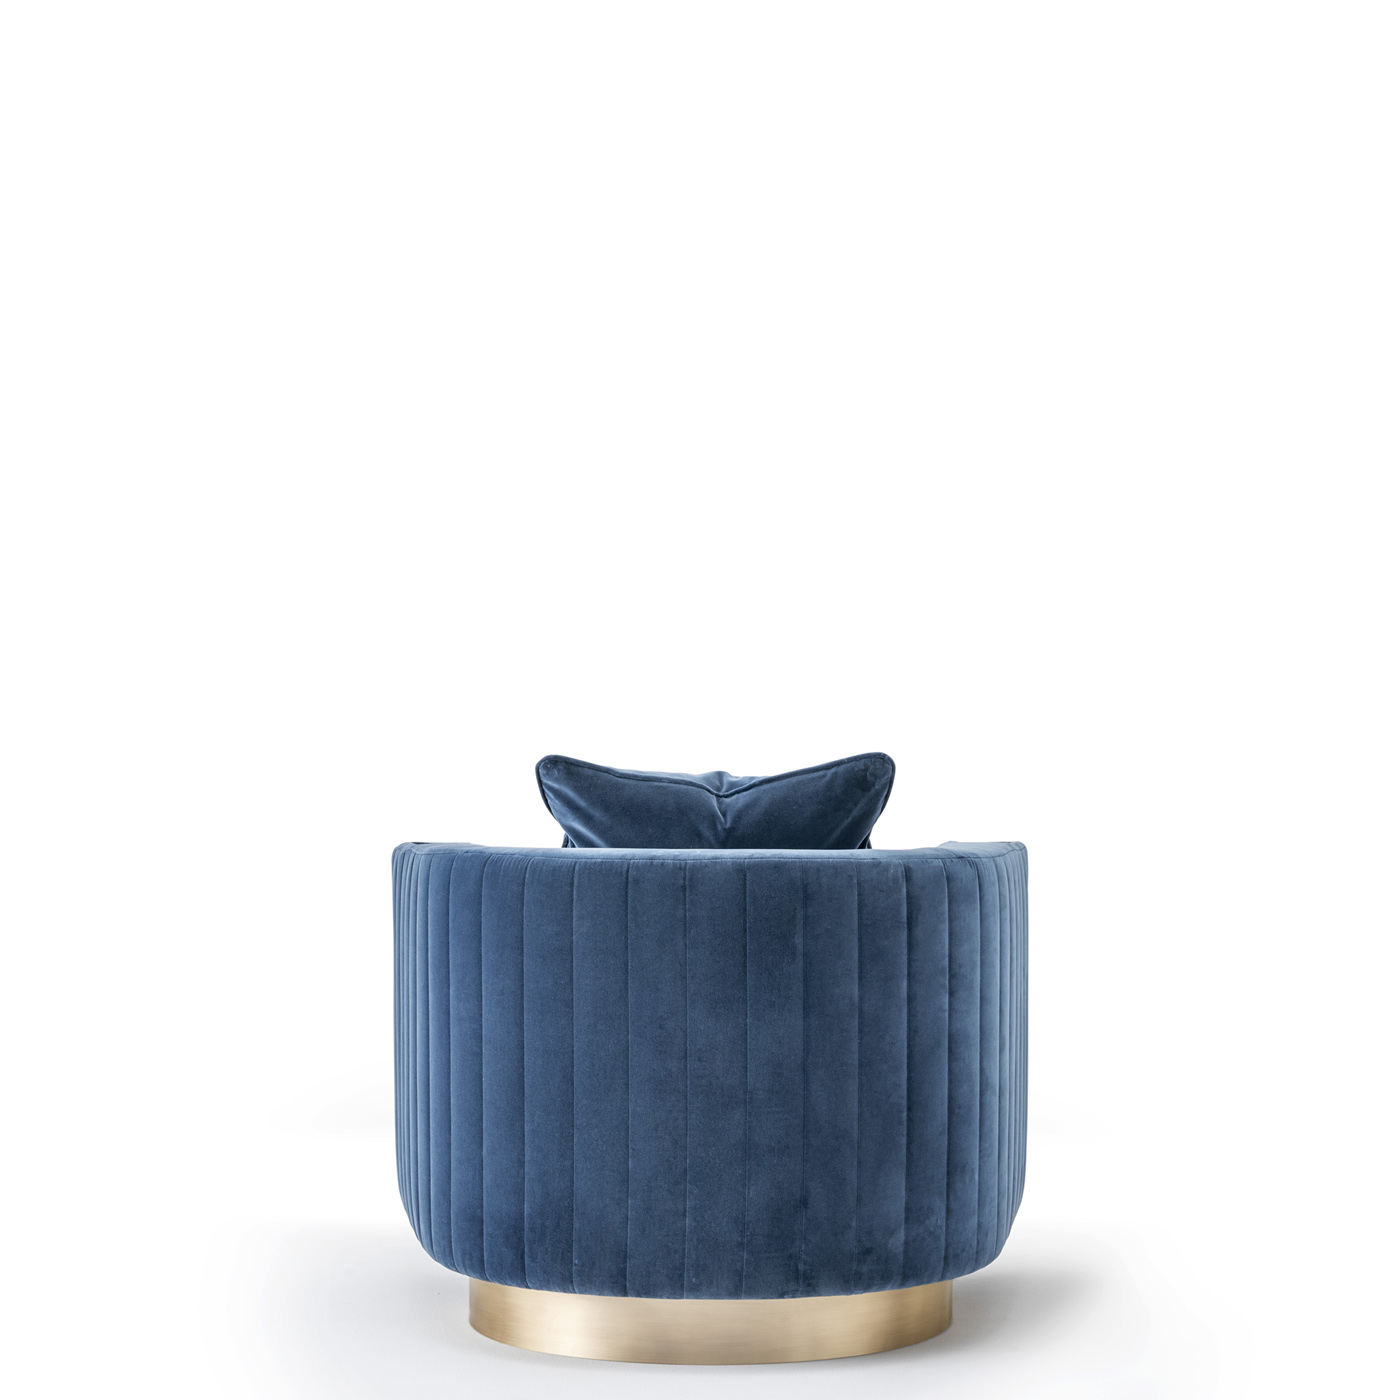 Sofas and seats - Rachele armchair with details in horn mod. 6040 - back side - Arcahorn